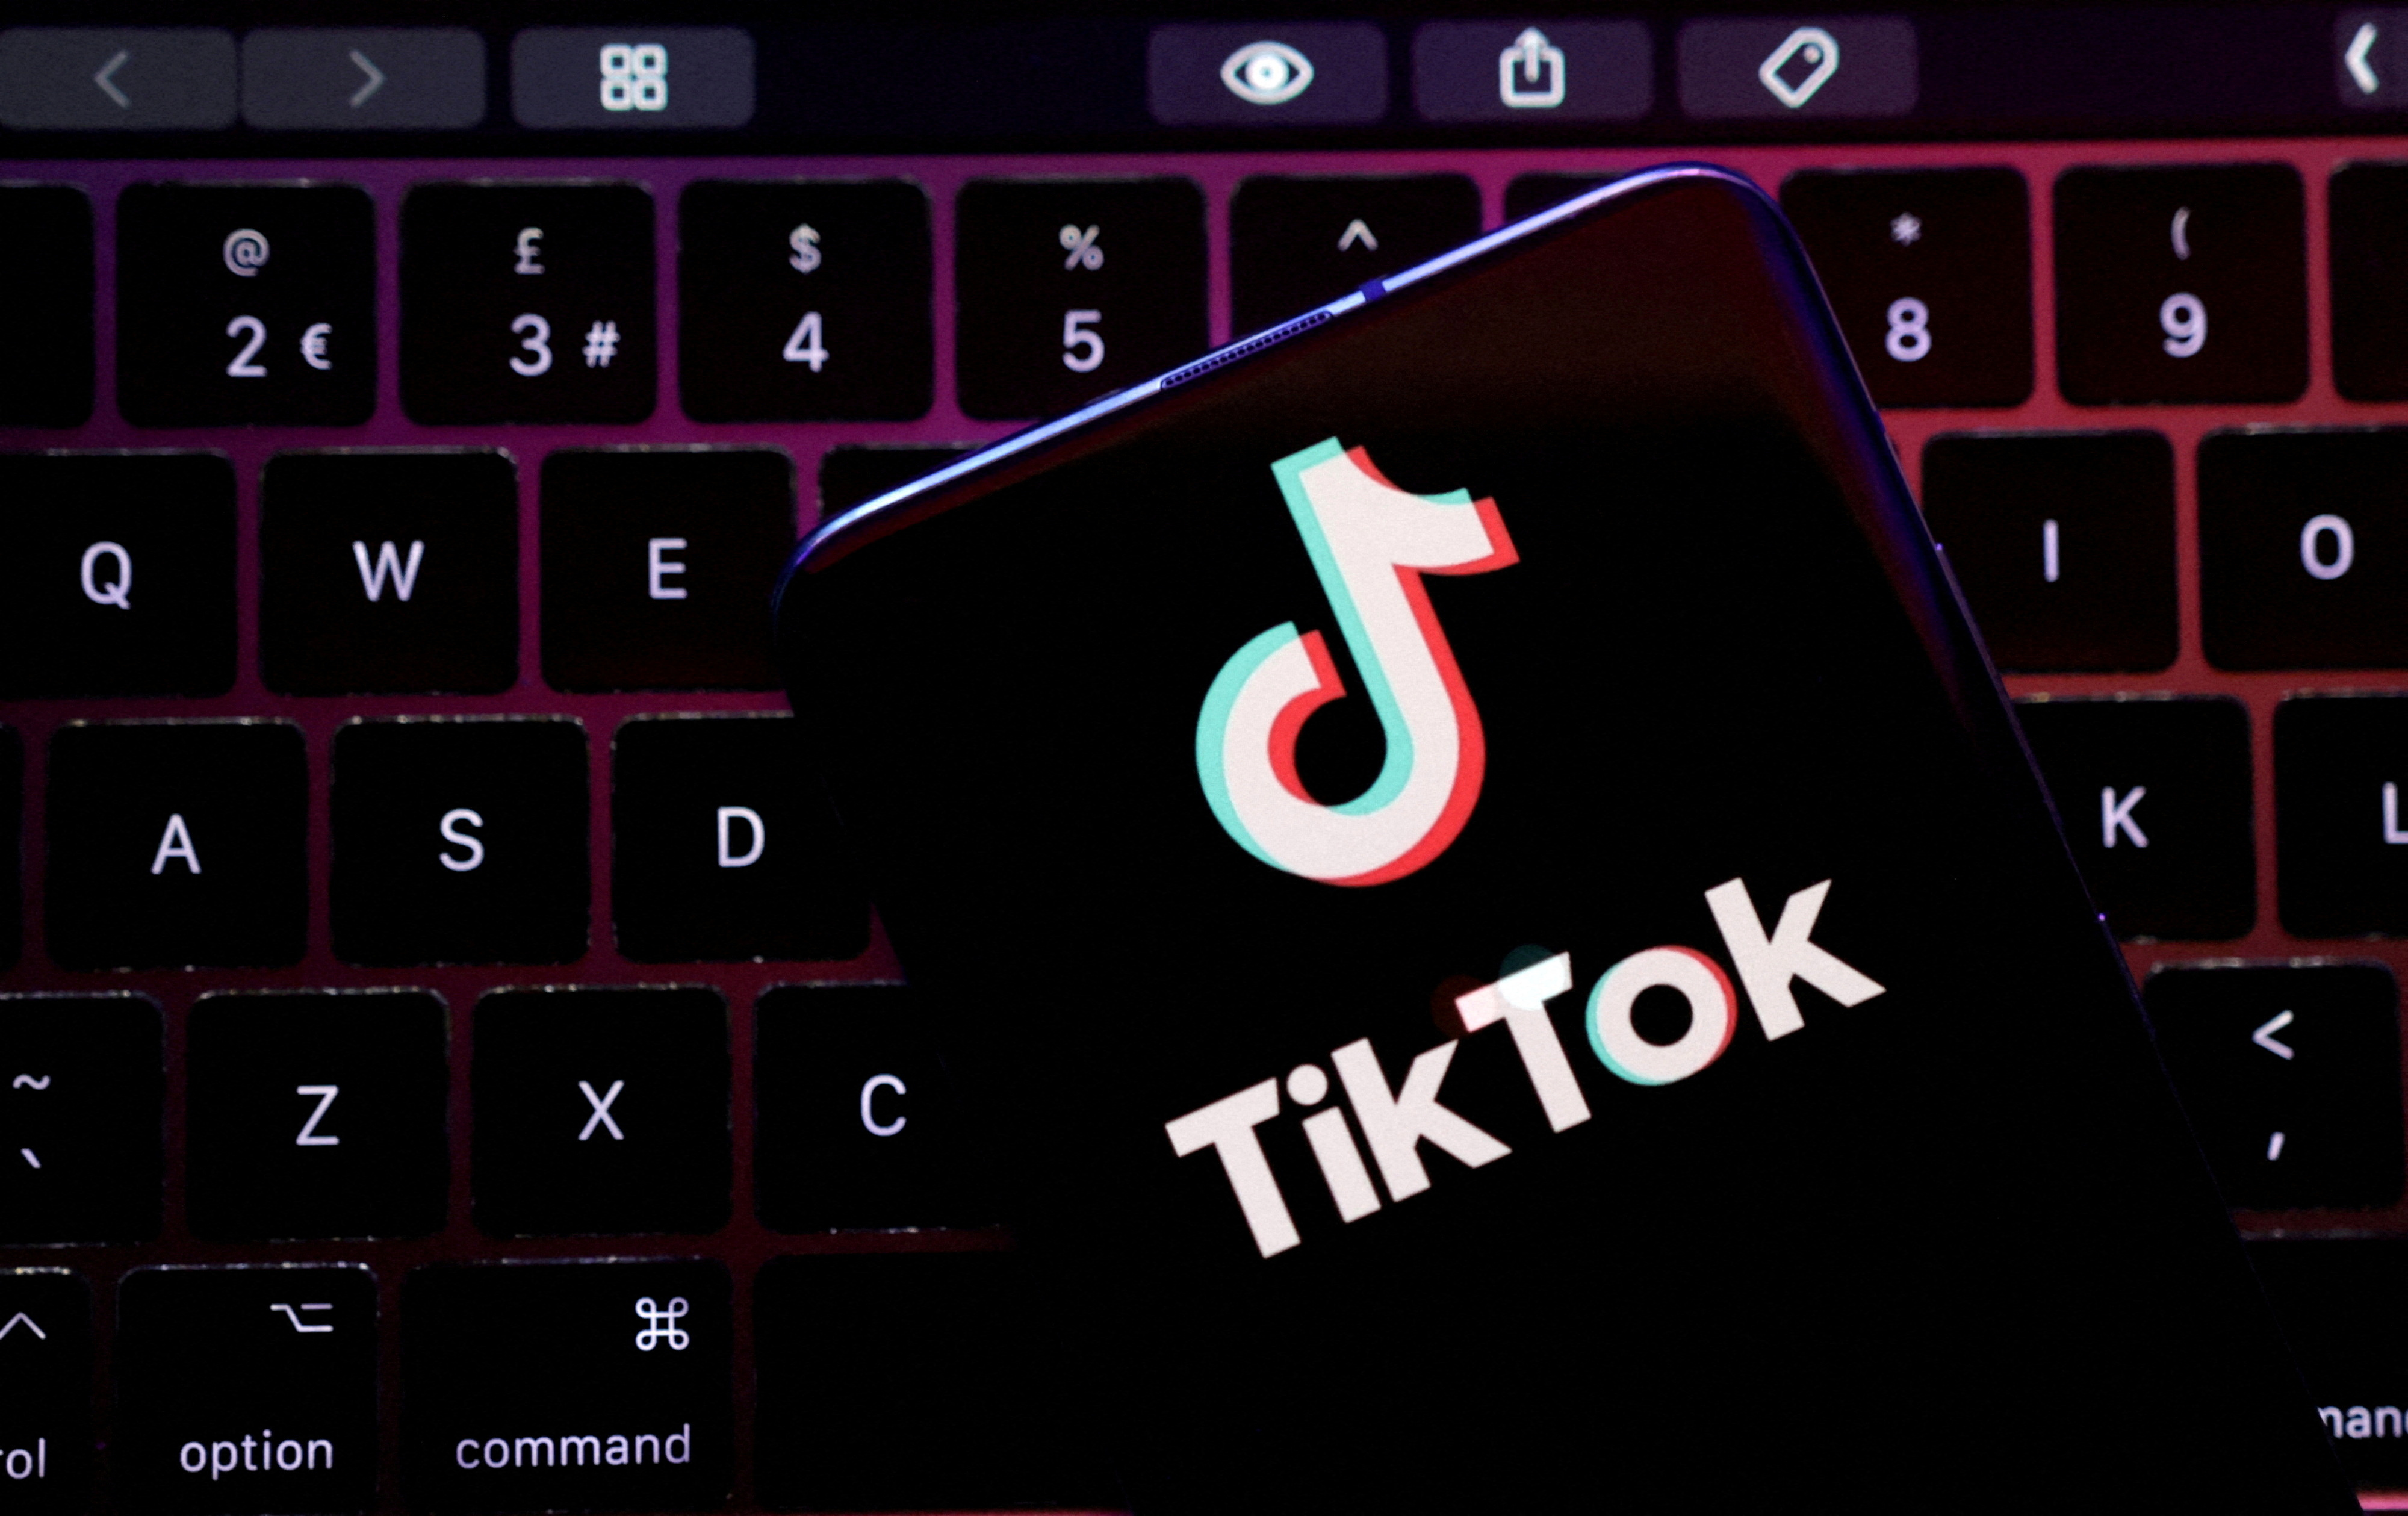 Which countries have banned TikTok and why?